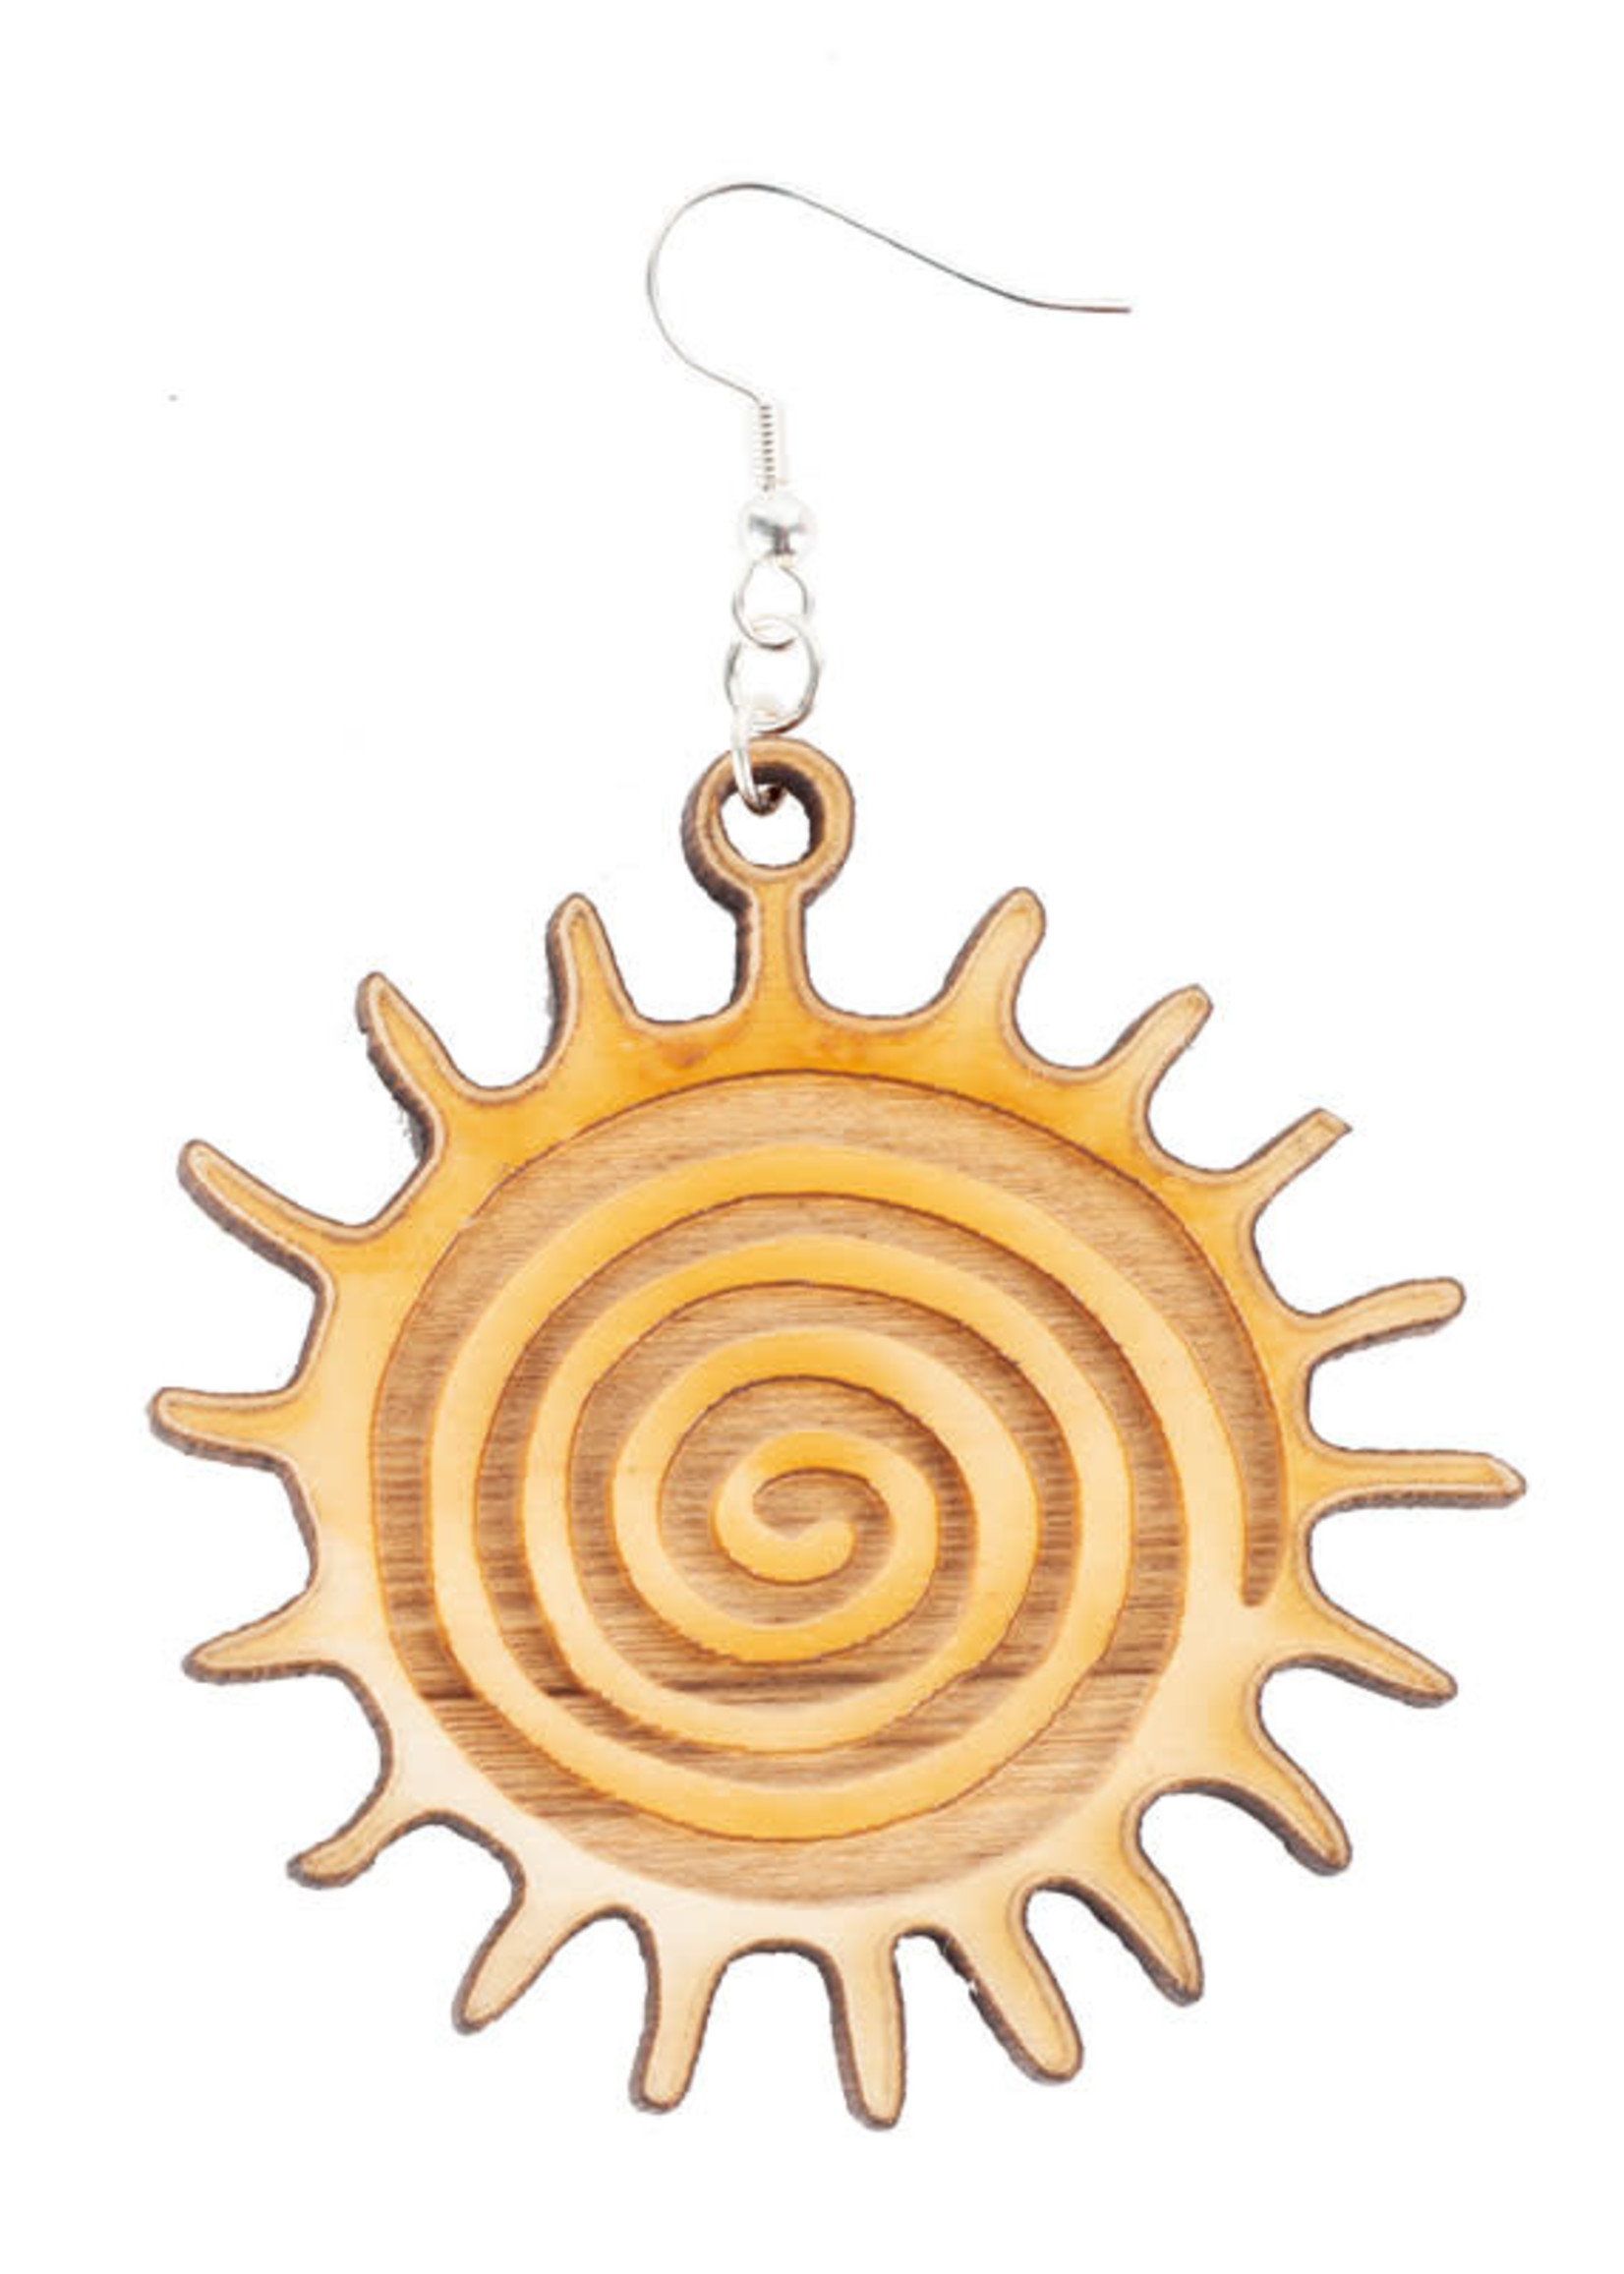 SPIRAL SUN Laser Cut Wood Earrings - Made in the U.S.A.;  1.4" x 1.4"; Maple